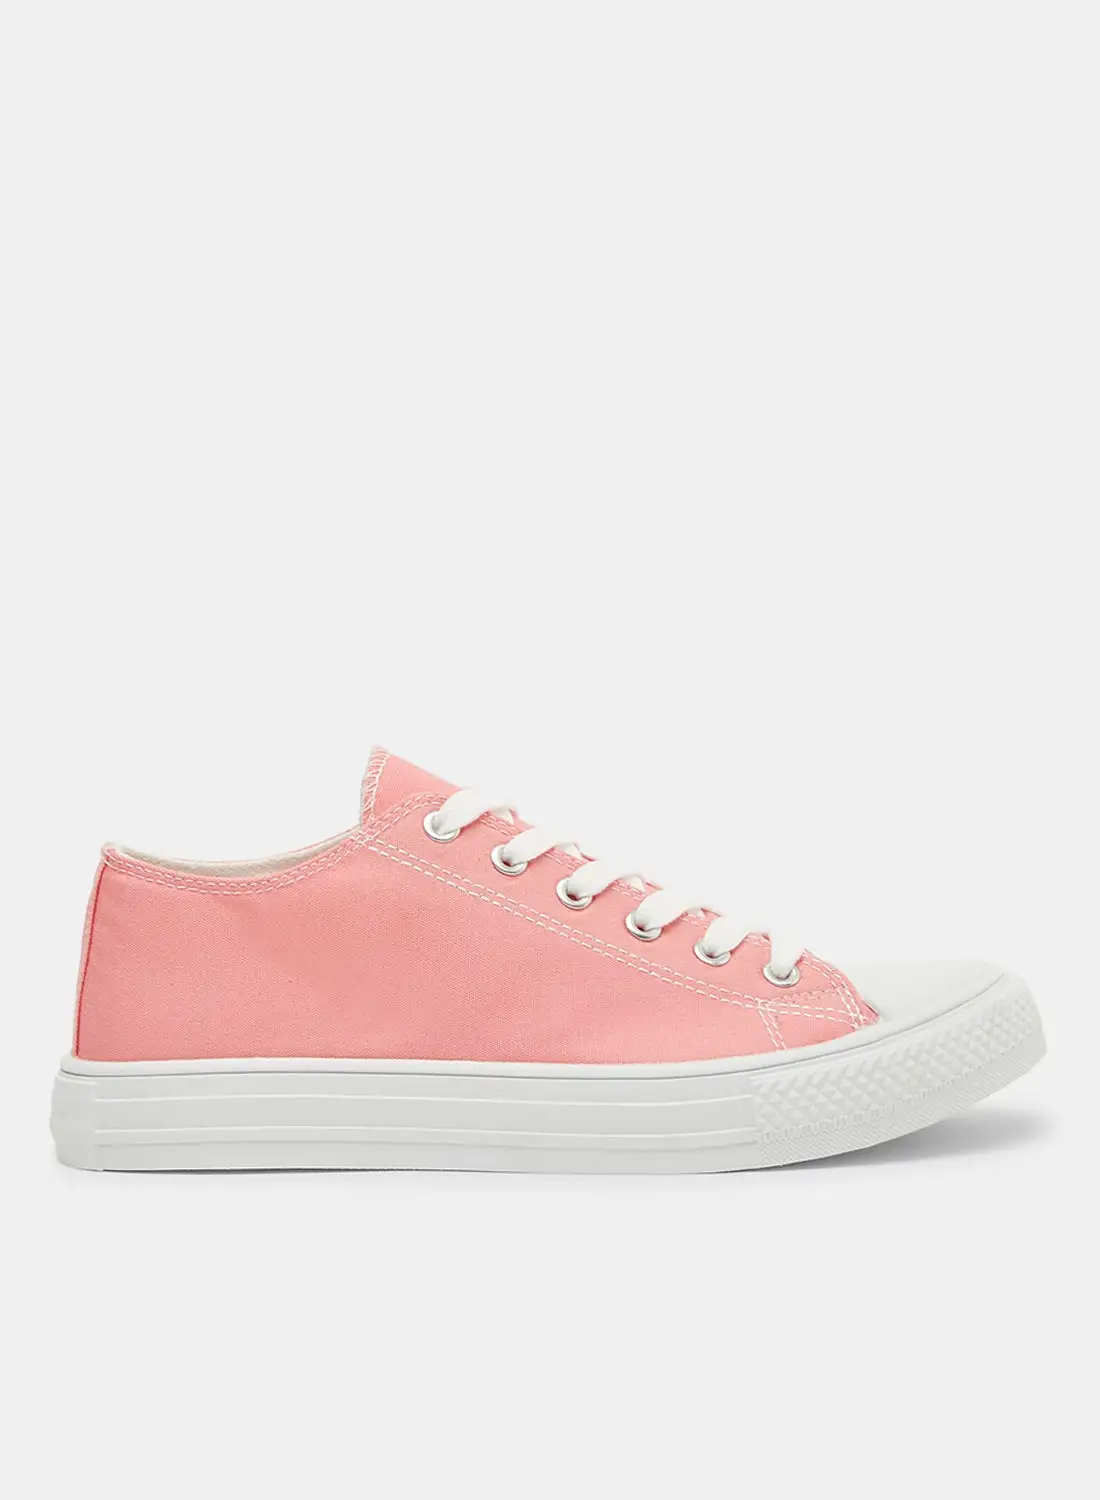 LABEL RAIL Canvas Low Top Sneakers Peach